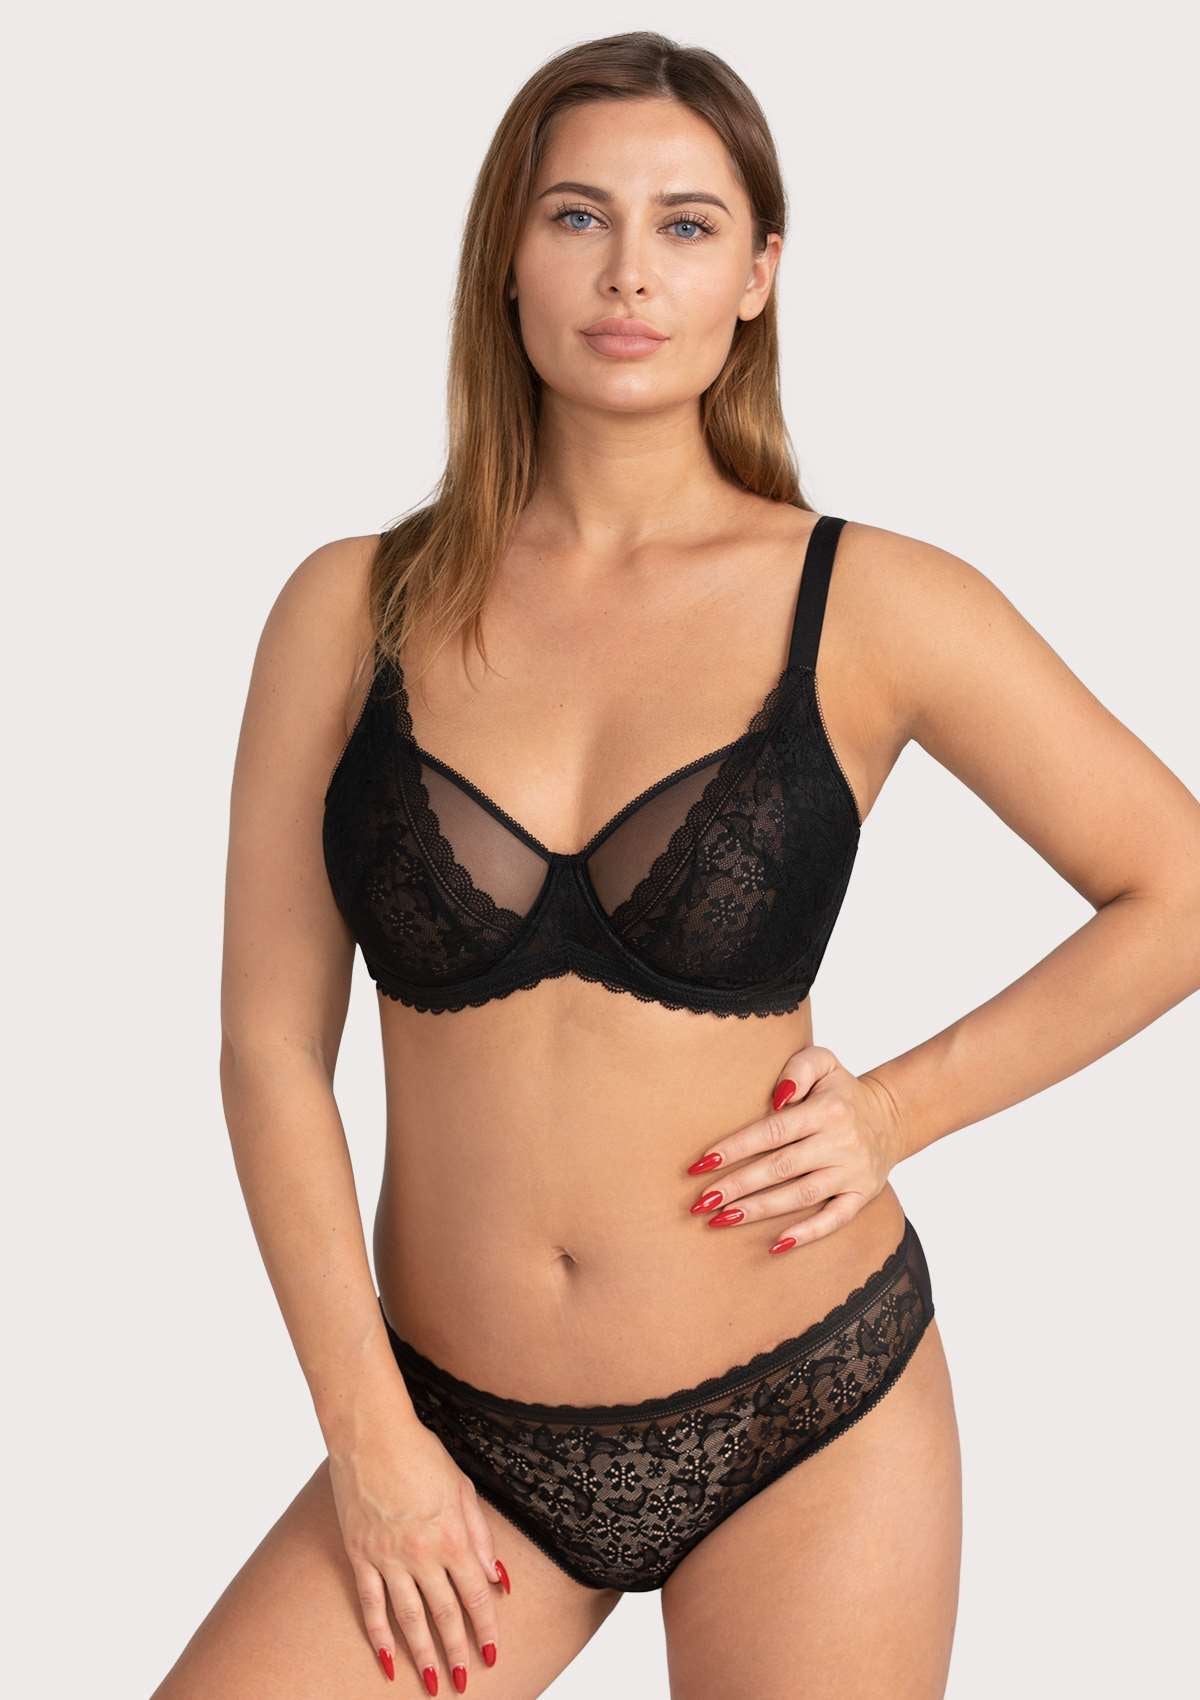 HSIA Anemone Lace Bra And Panties: Back Support Wired Bra - Black / 42 / DD/E